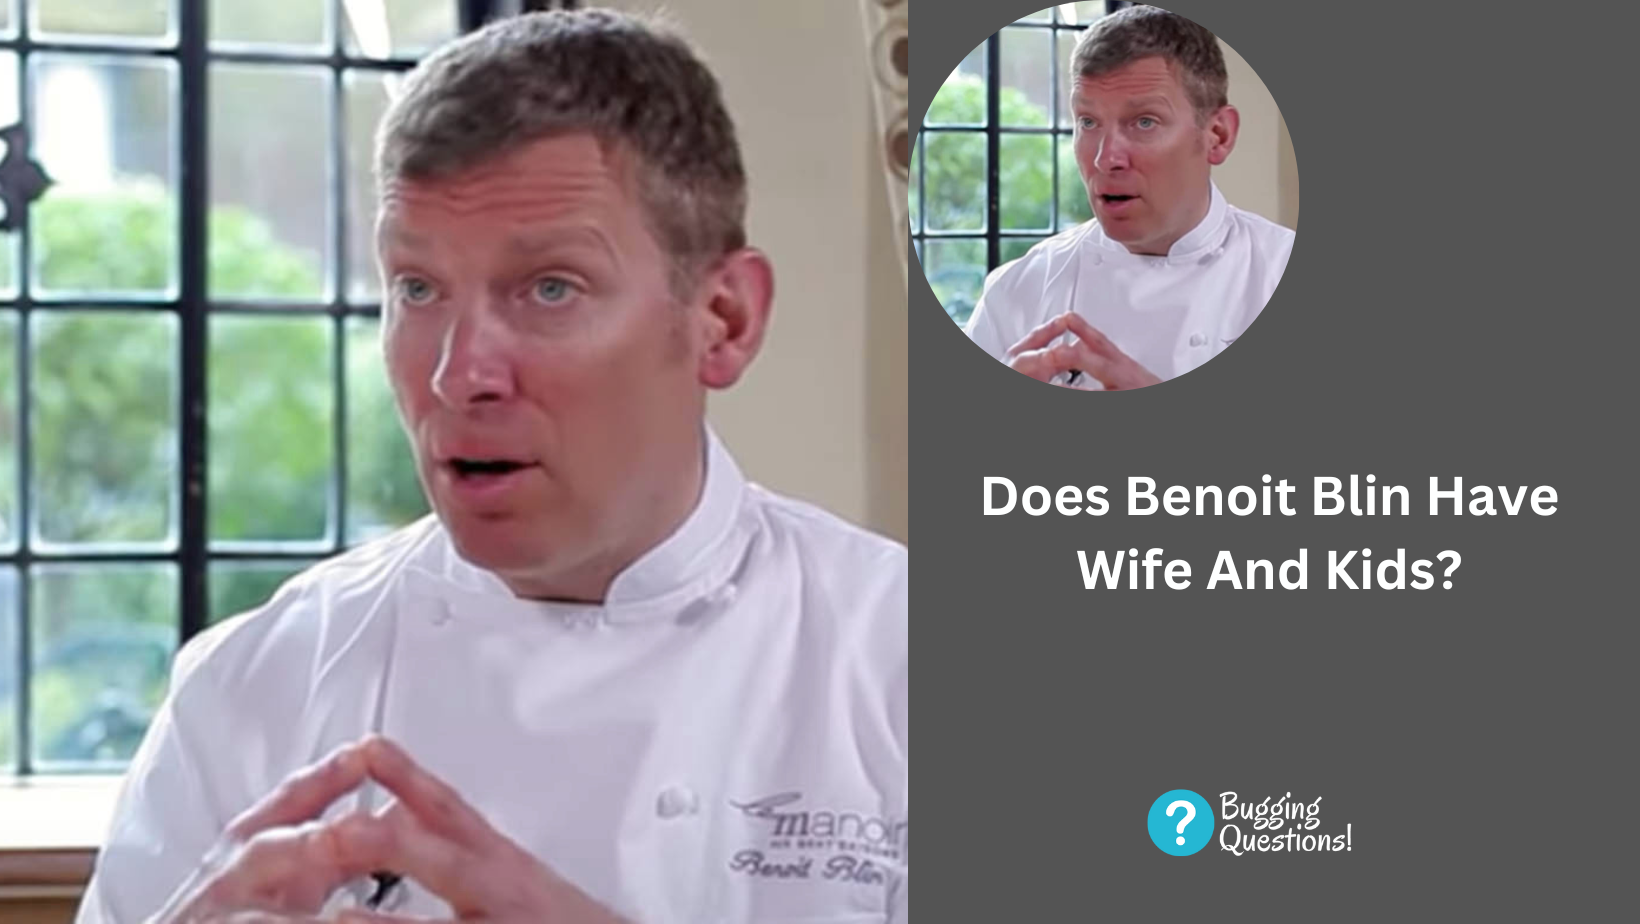 Does Benoit Blin Have Wife And Kids?